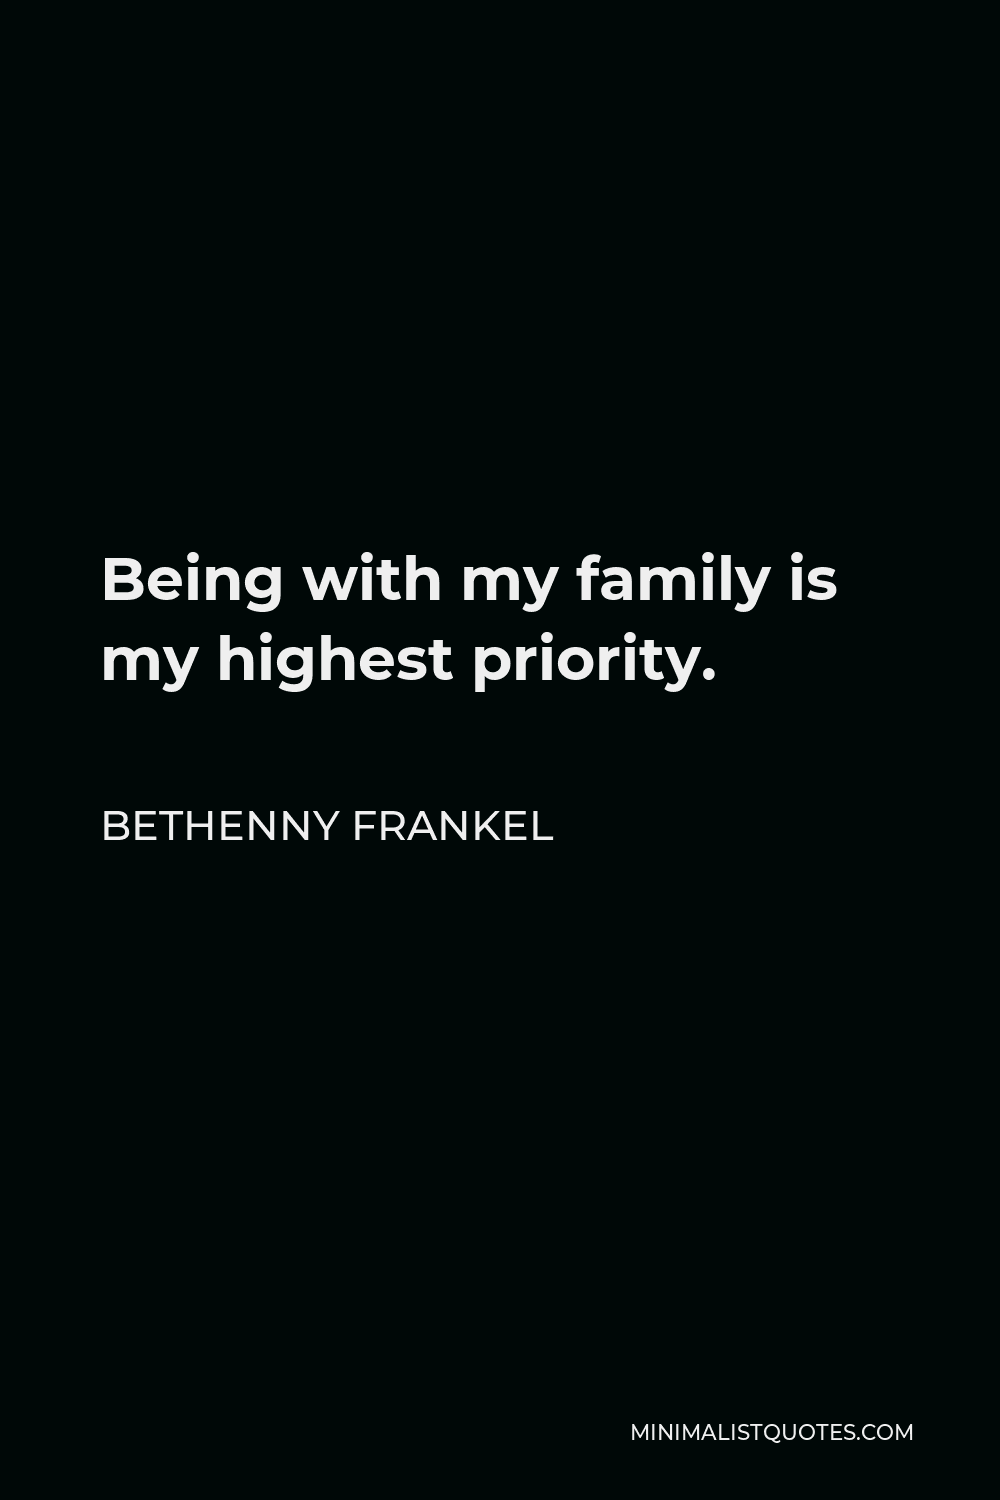 Bethenny Frankel Quote - Being with my family is my highest priority.